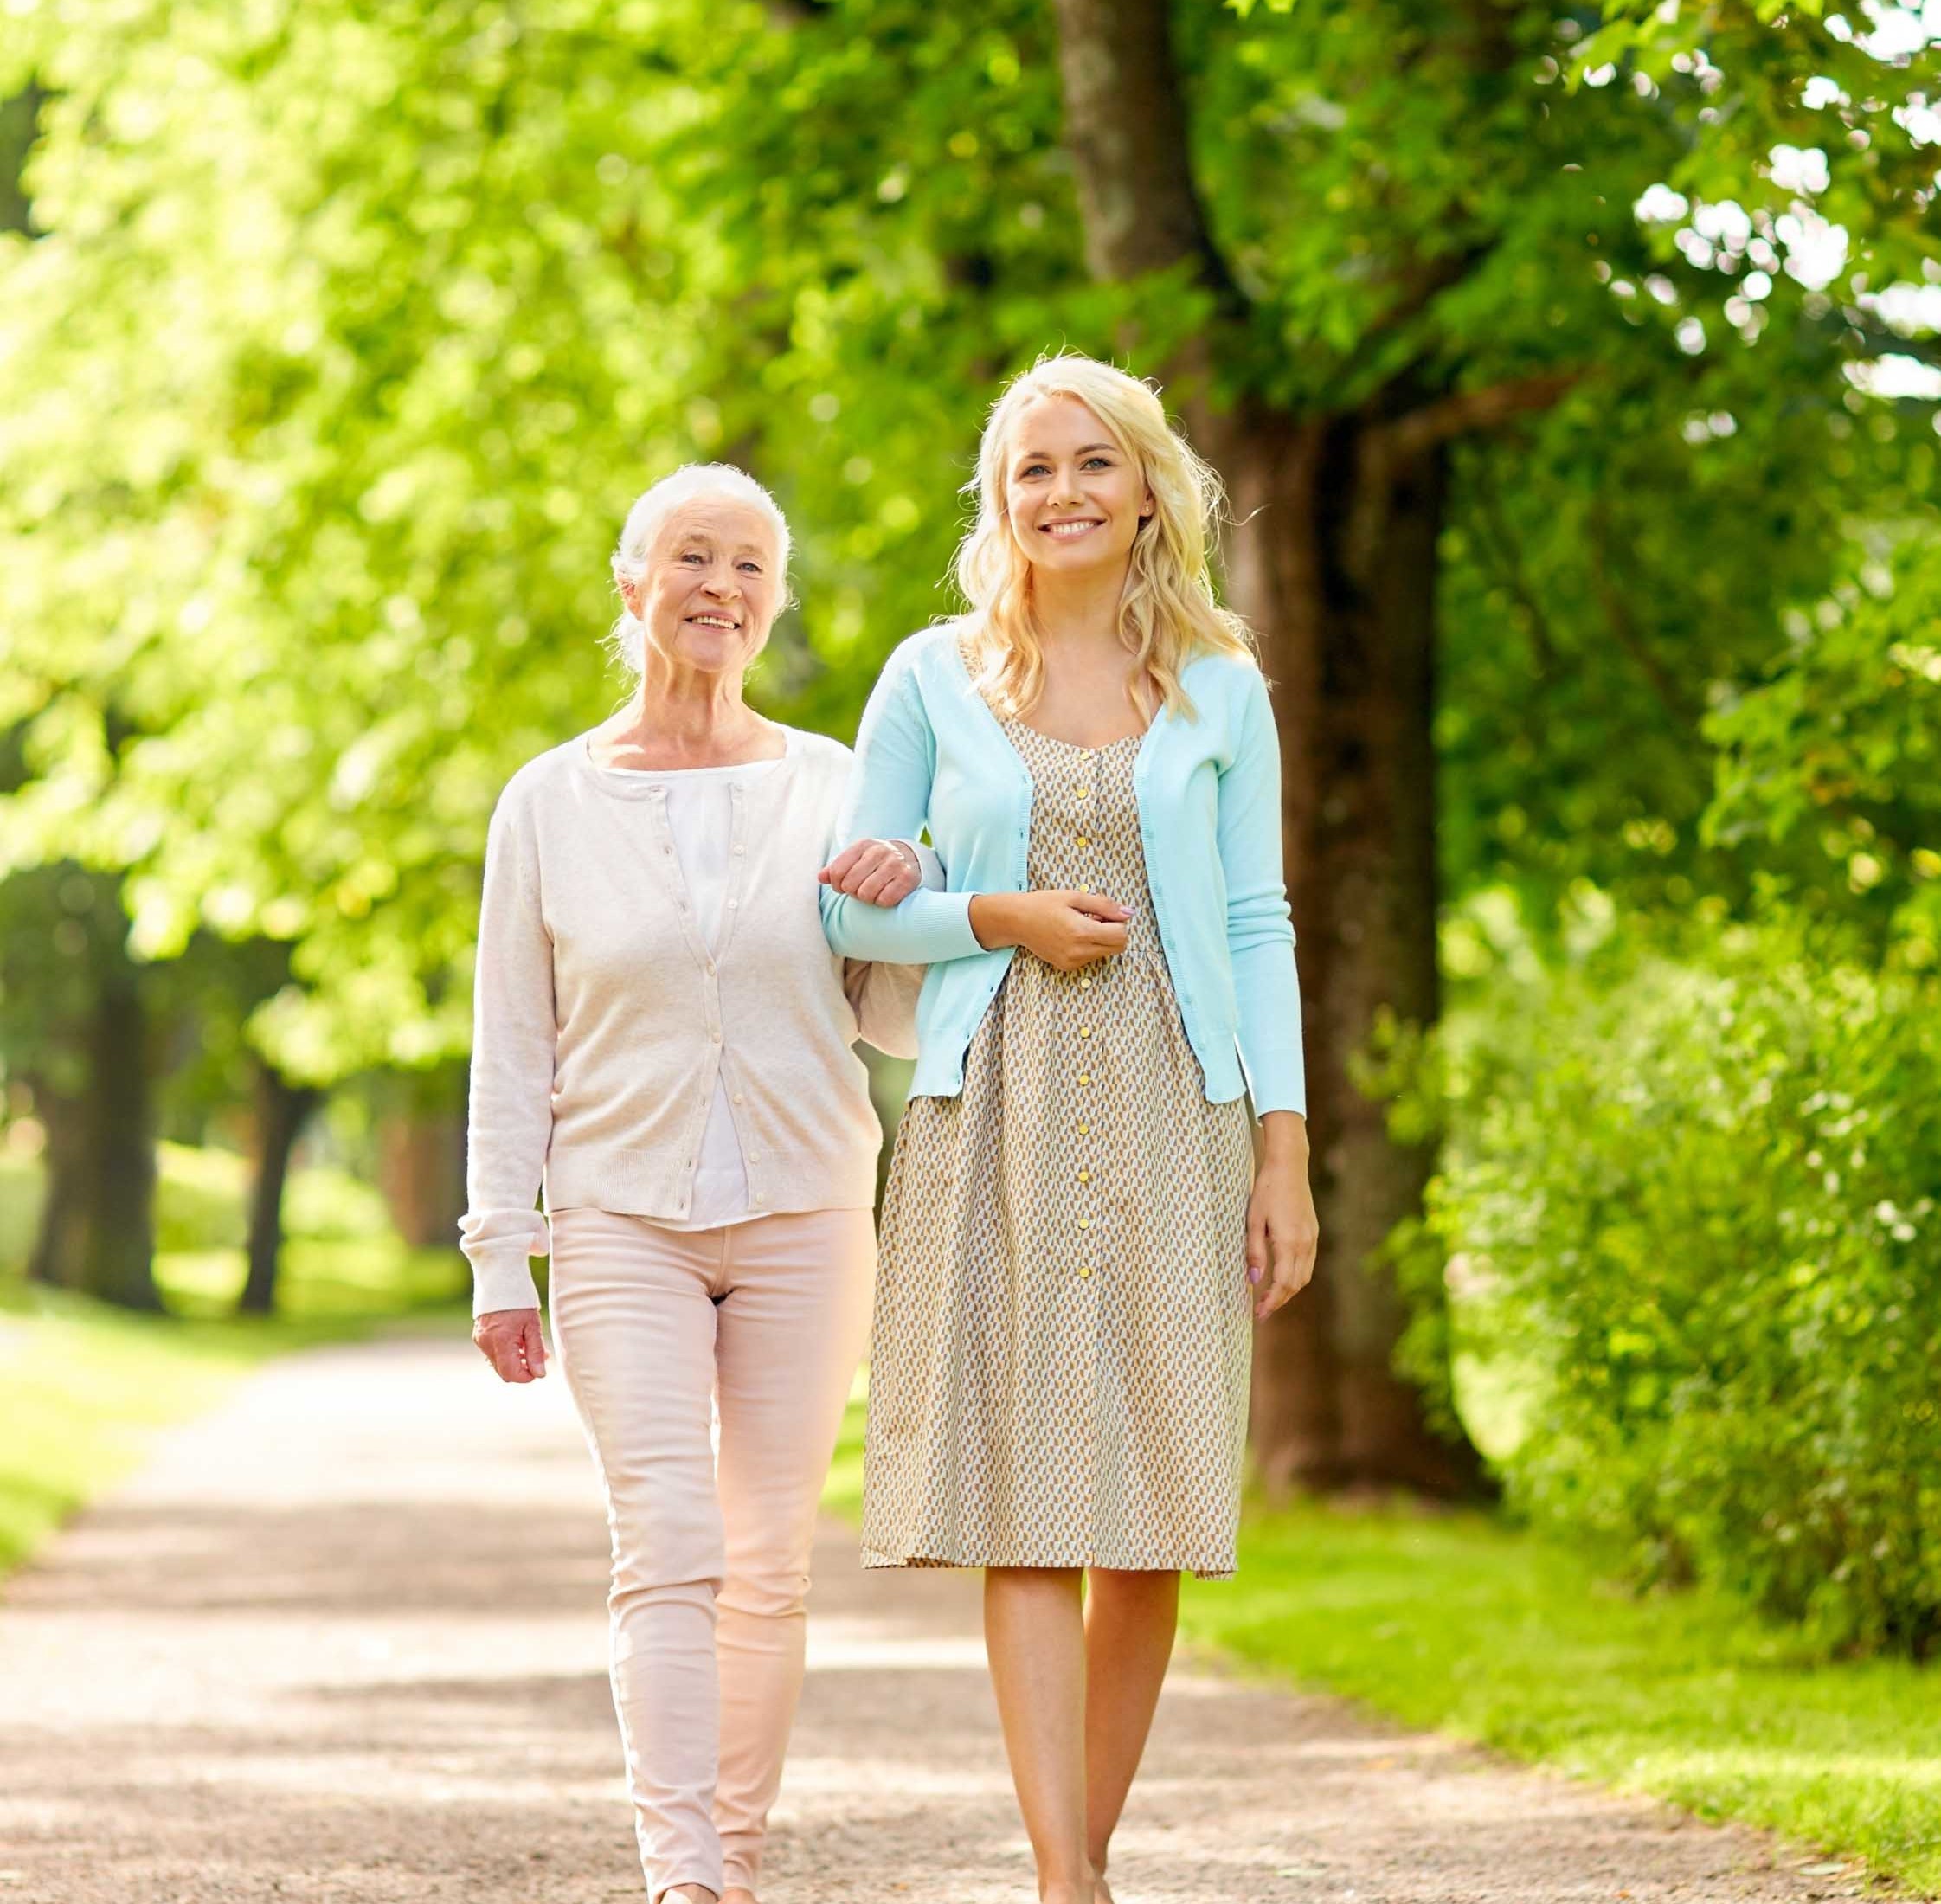 Two woman walking together.